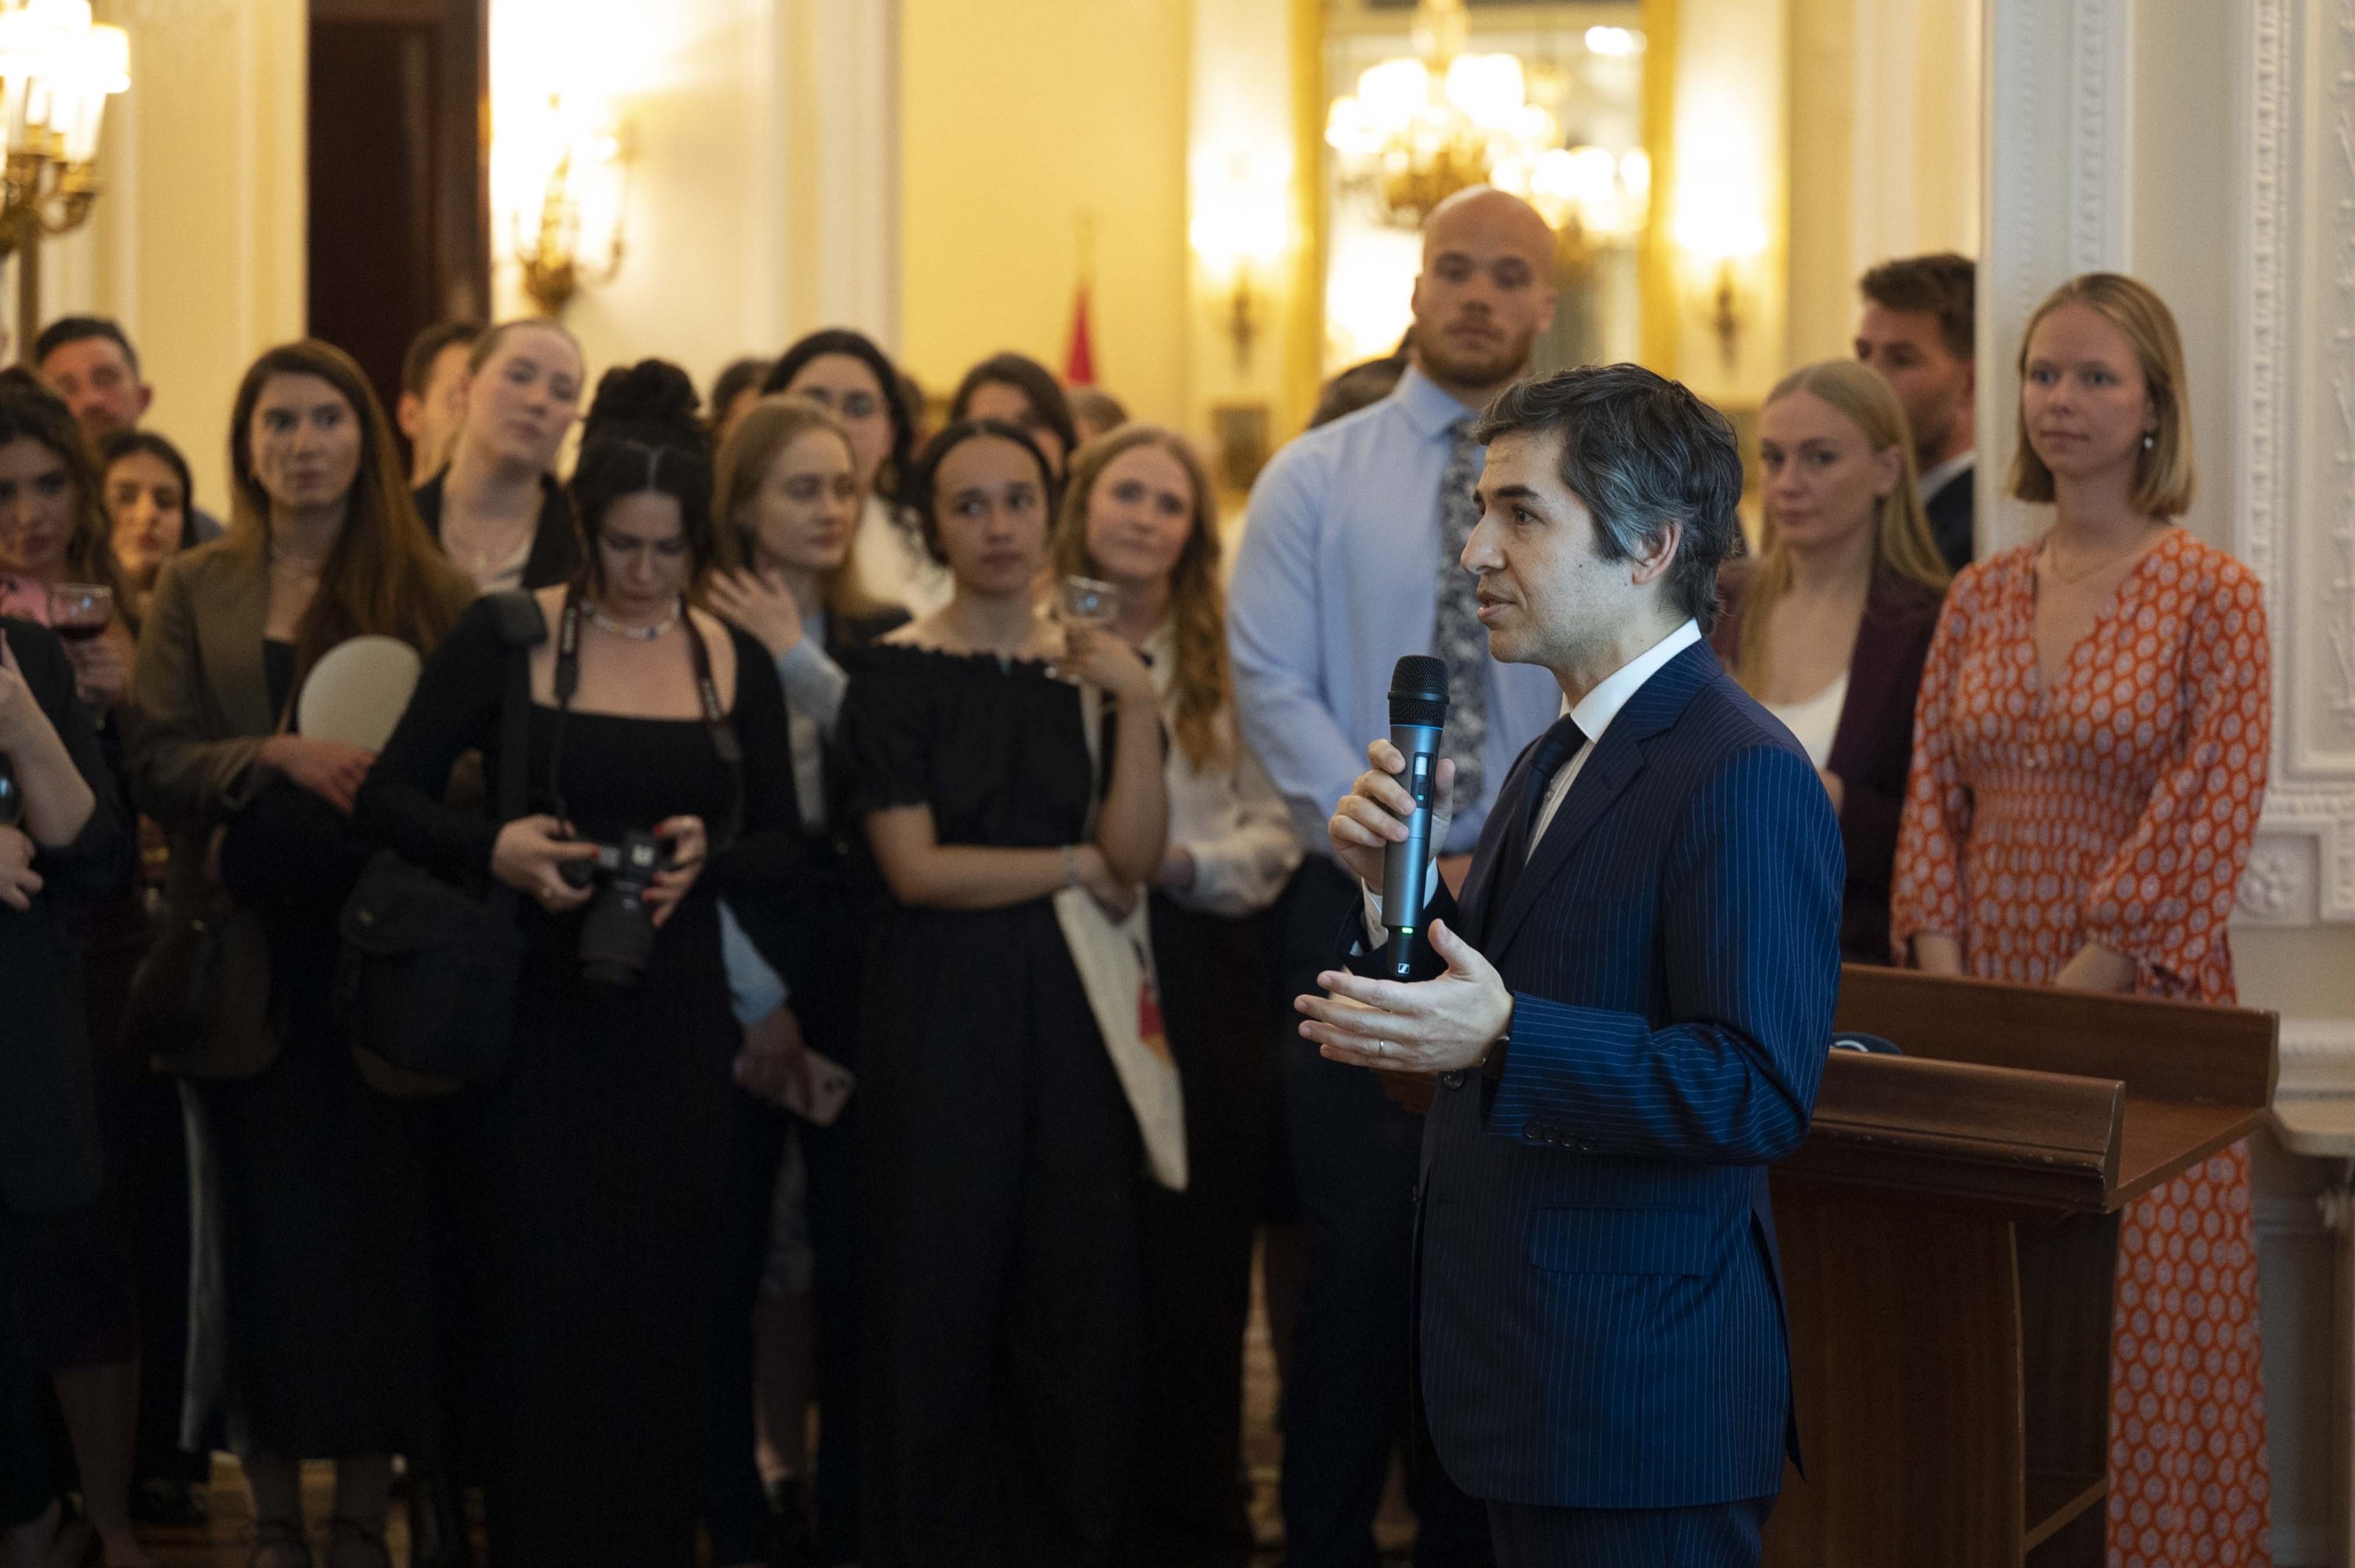 Under the coordination of Türkiye's ambassador to London, Osman Koray Ertaş, students from the "Sotheby's Institute of Art" organized an auction to benefit the people affected by the earthquakes that occurred in Kahramanmaraş on Feb. 6, London, U.K., May 30, 2023. (AA Photo)